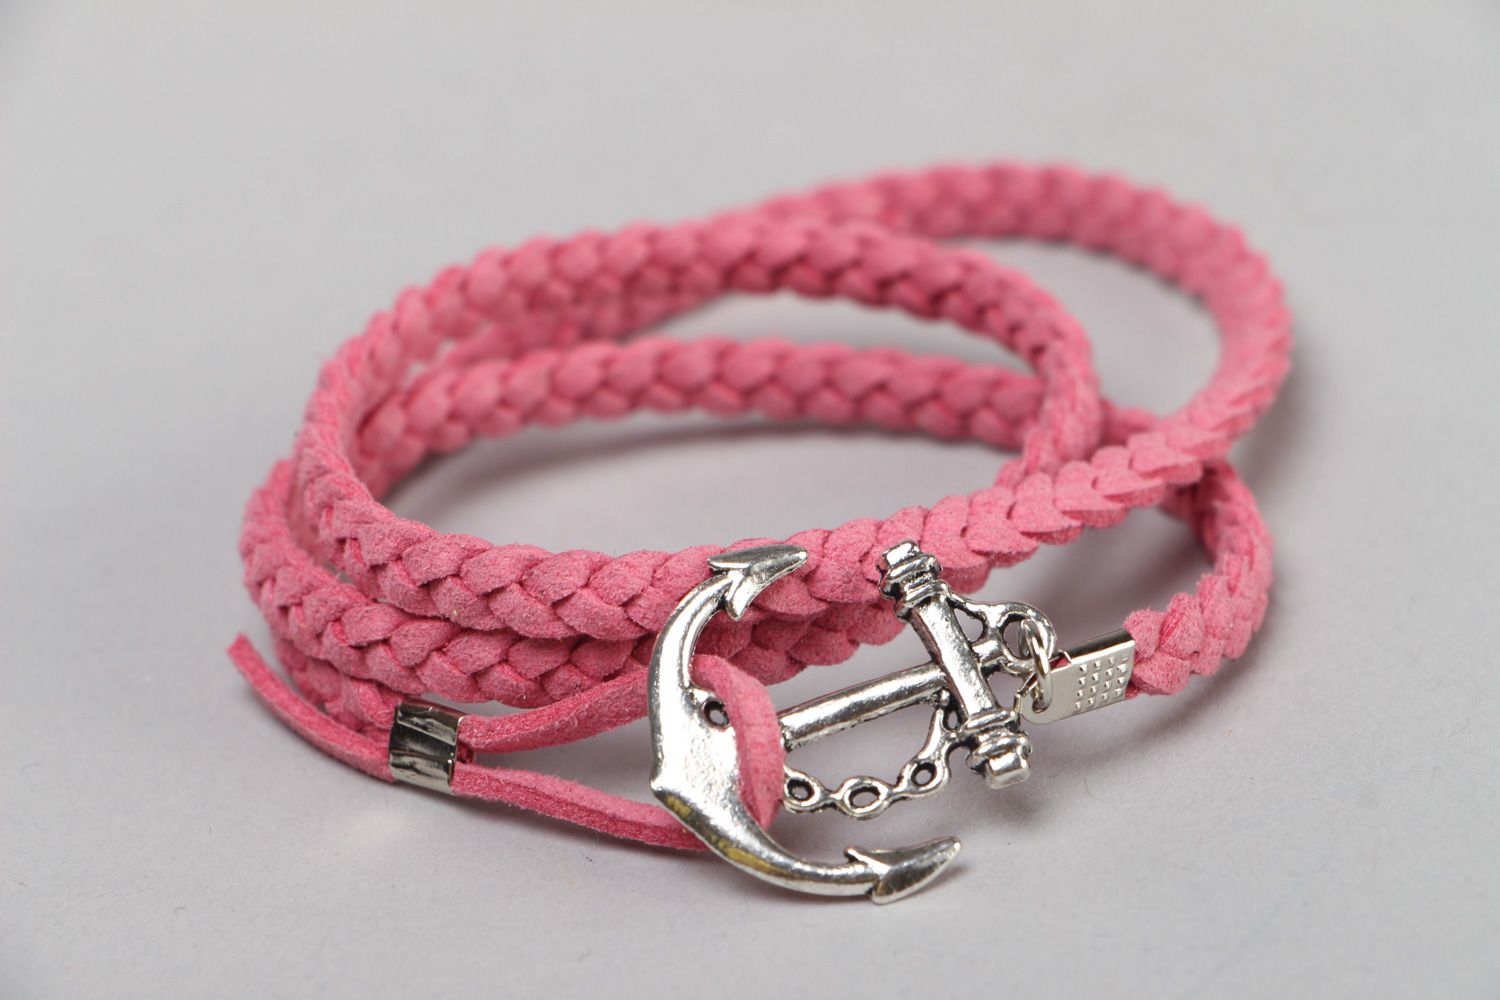 Hand woven artificial leather cord bracelet with charm in 3 turns photo 1